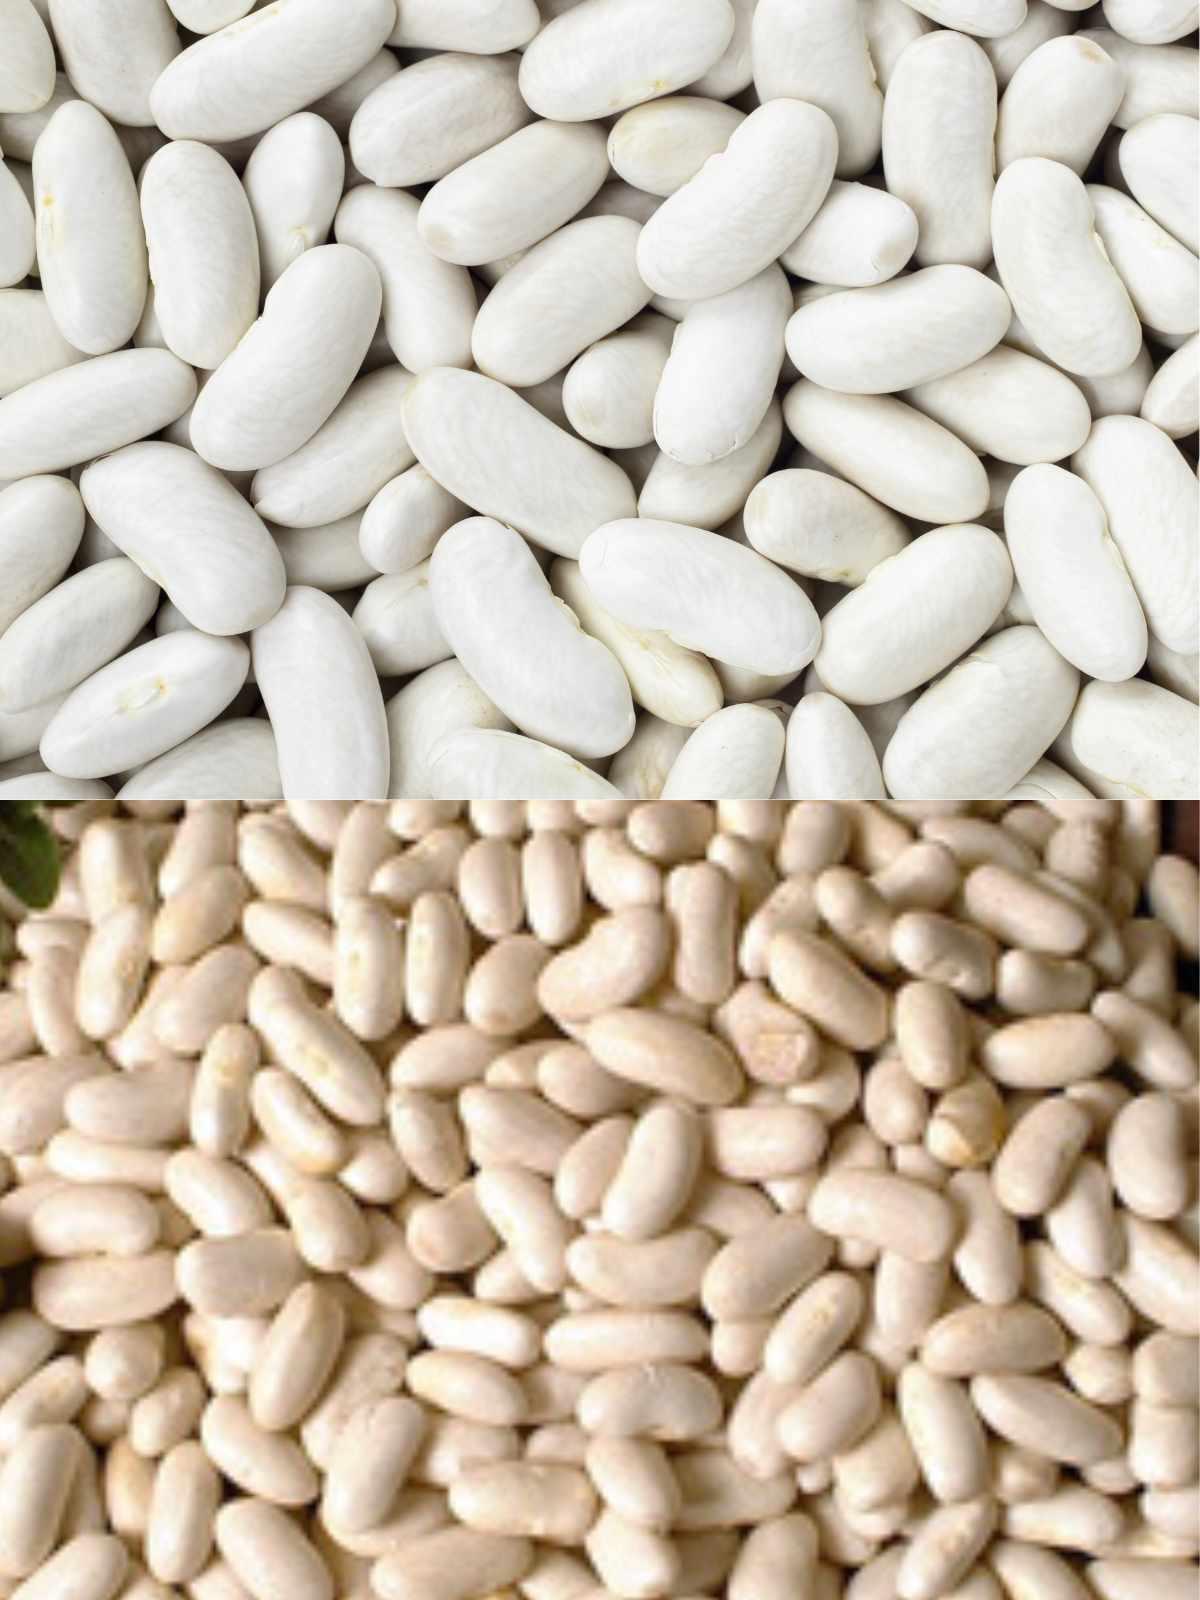 Difference Between Cannellini and Great Northern Beans